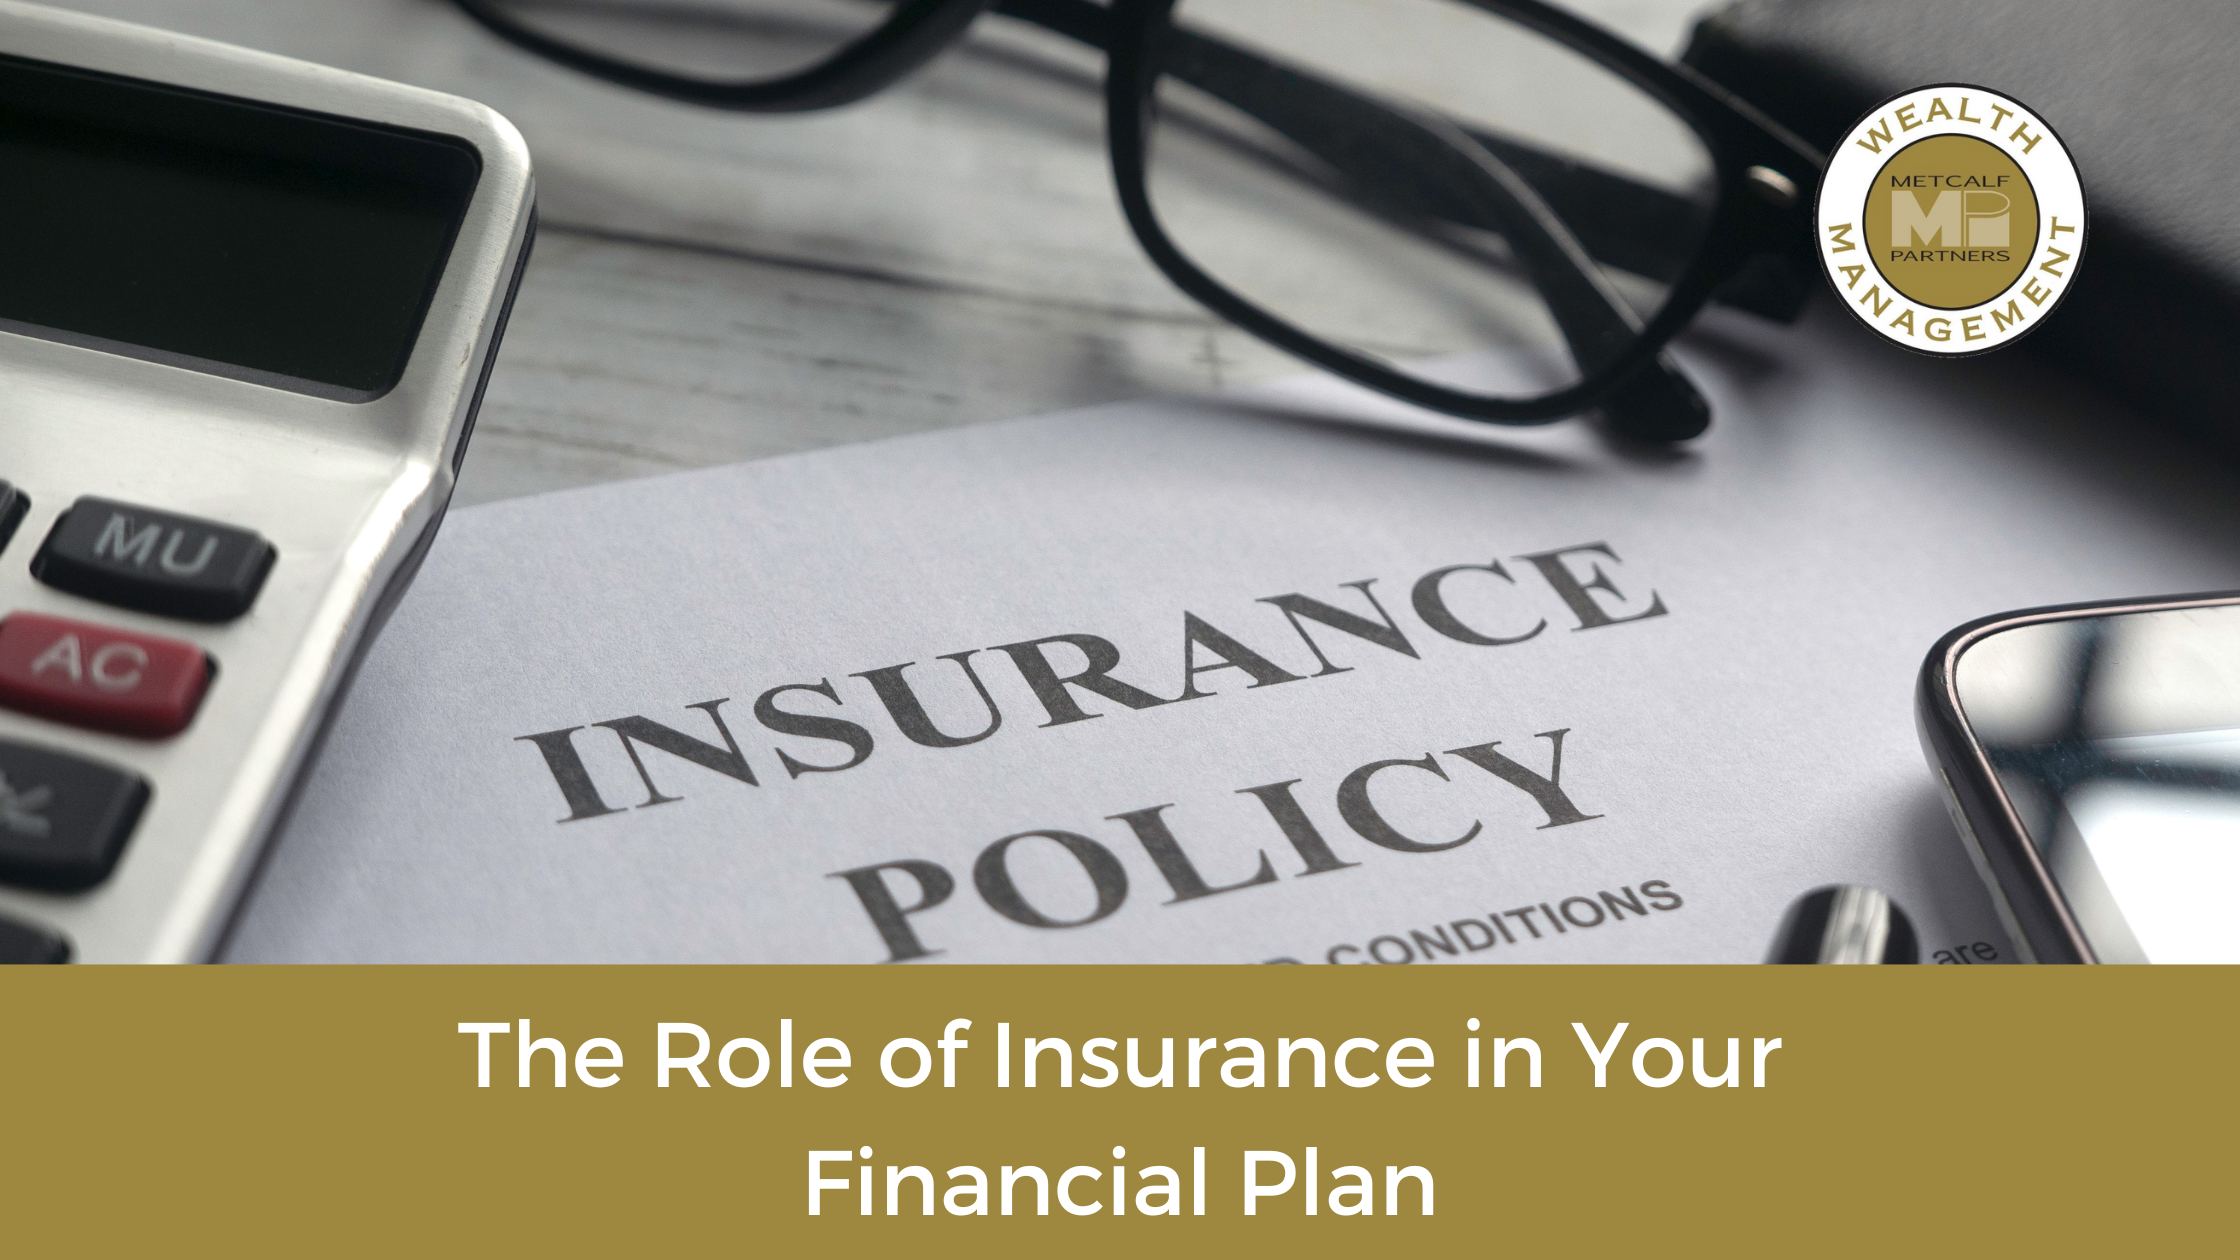 Featured image for “The Role of Insurance in Your Financial Plan”